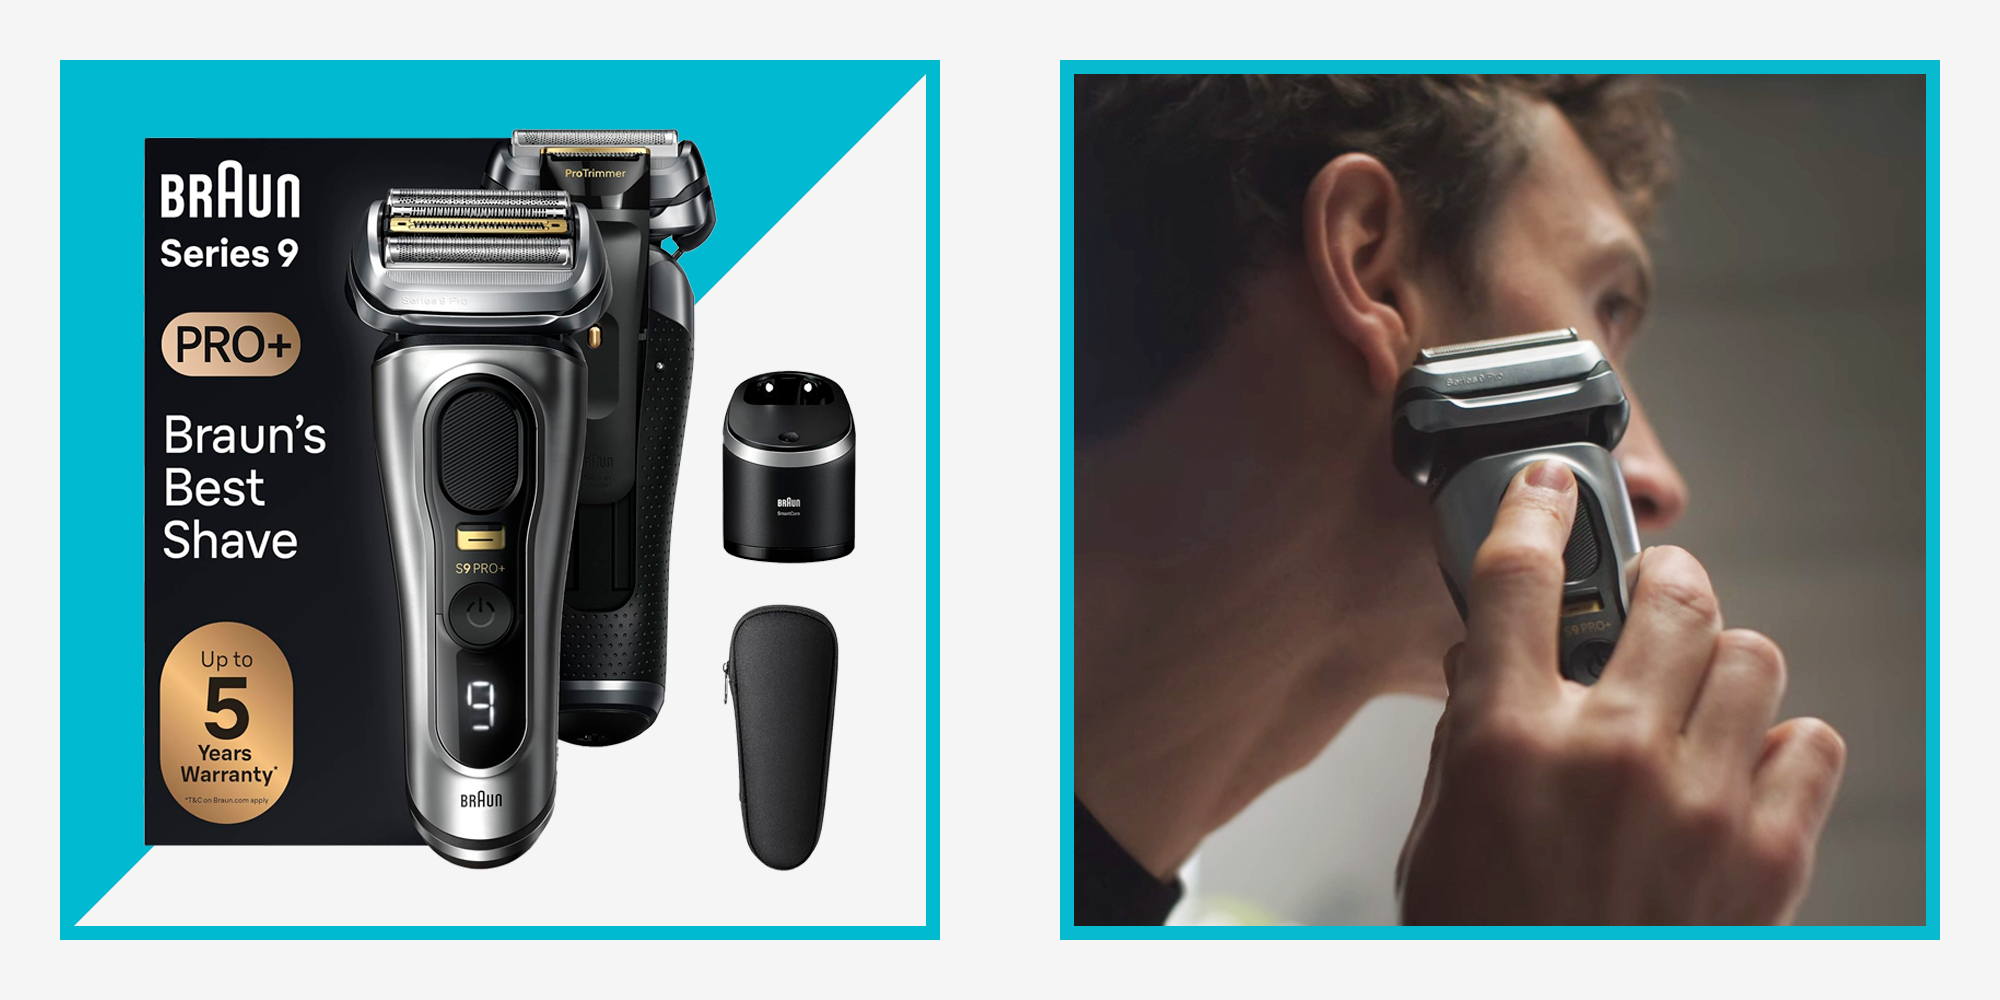 Series 9 PRO+ Electric Shaver with PowerCase, 6-in-1 SmartCare